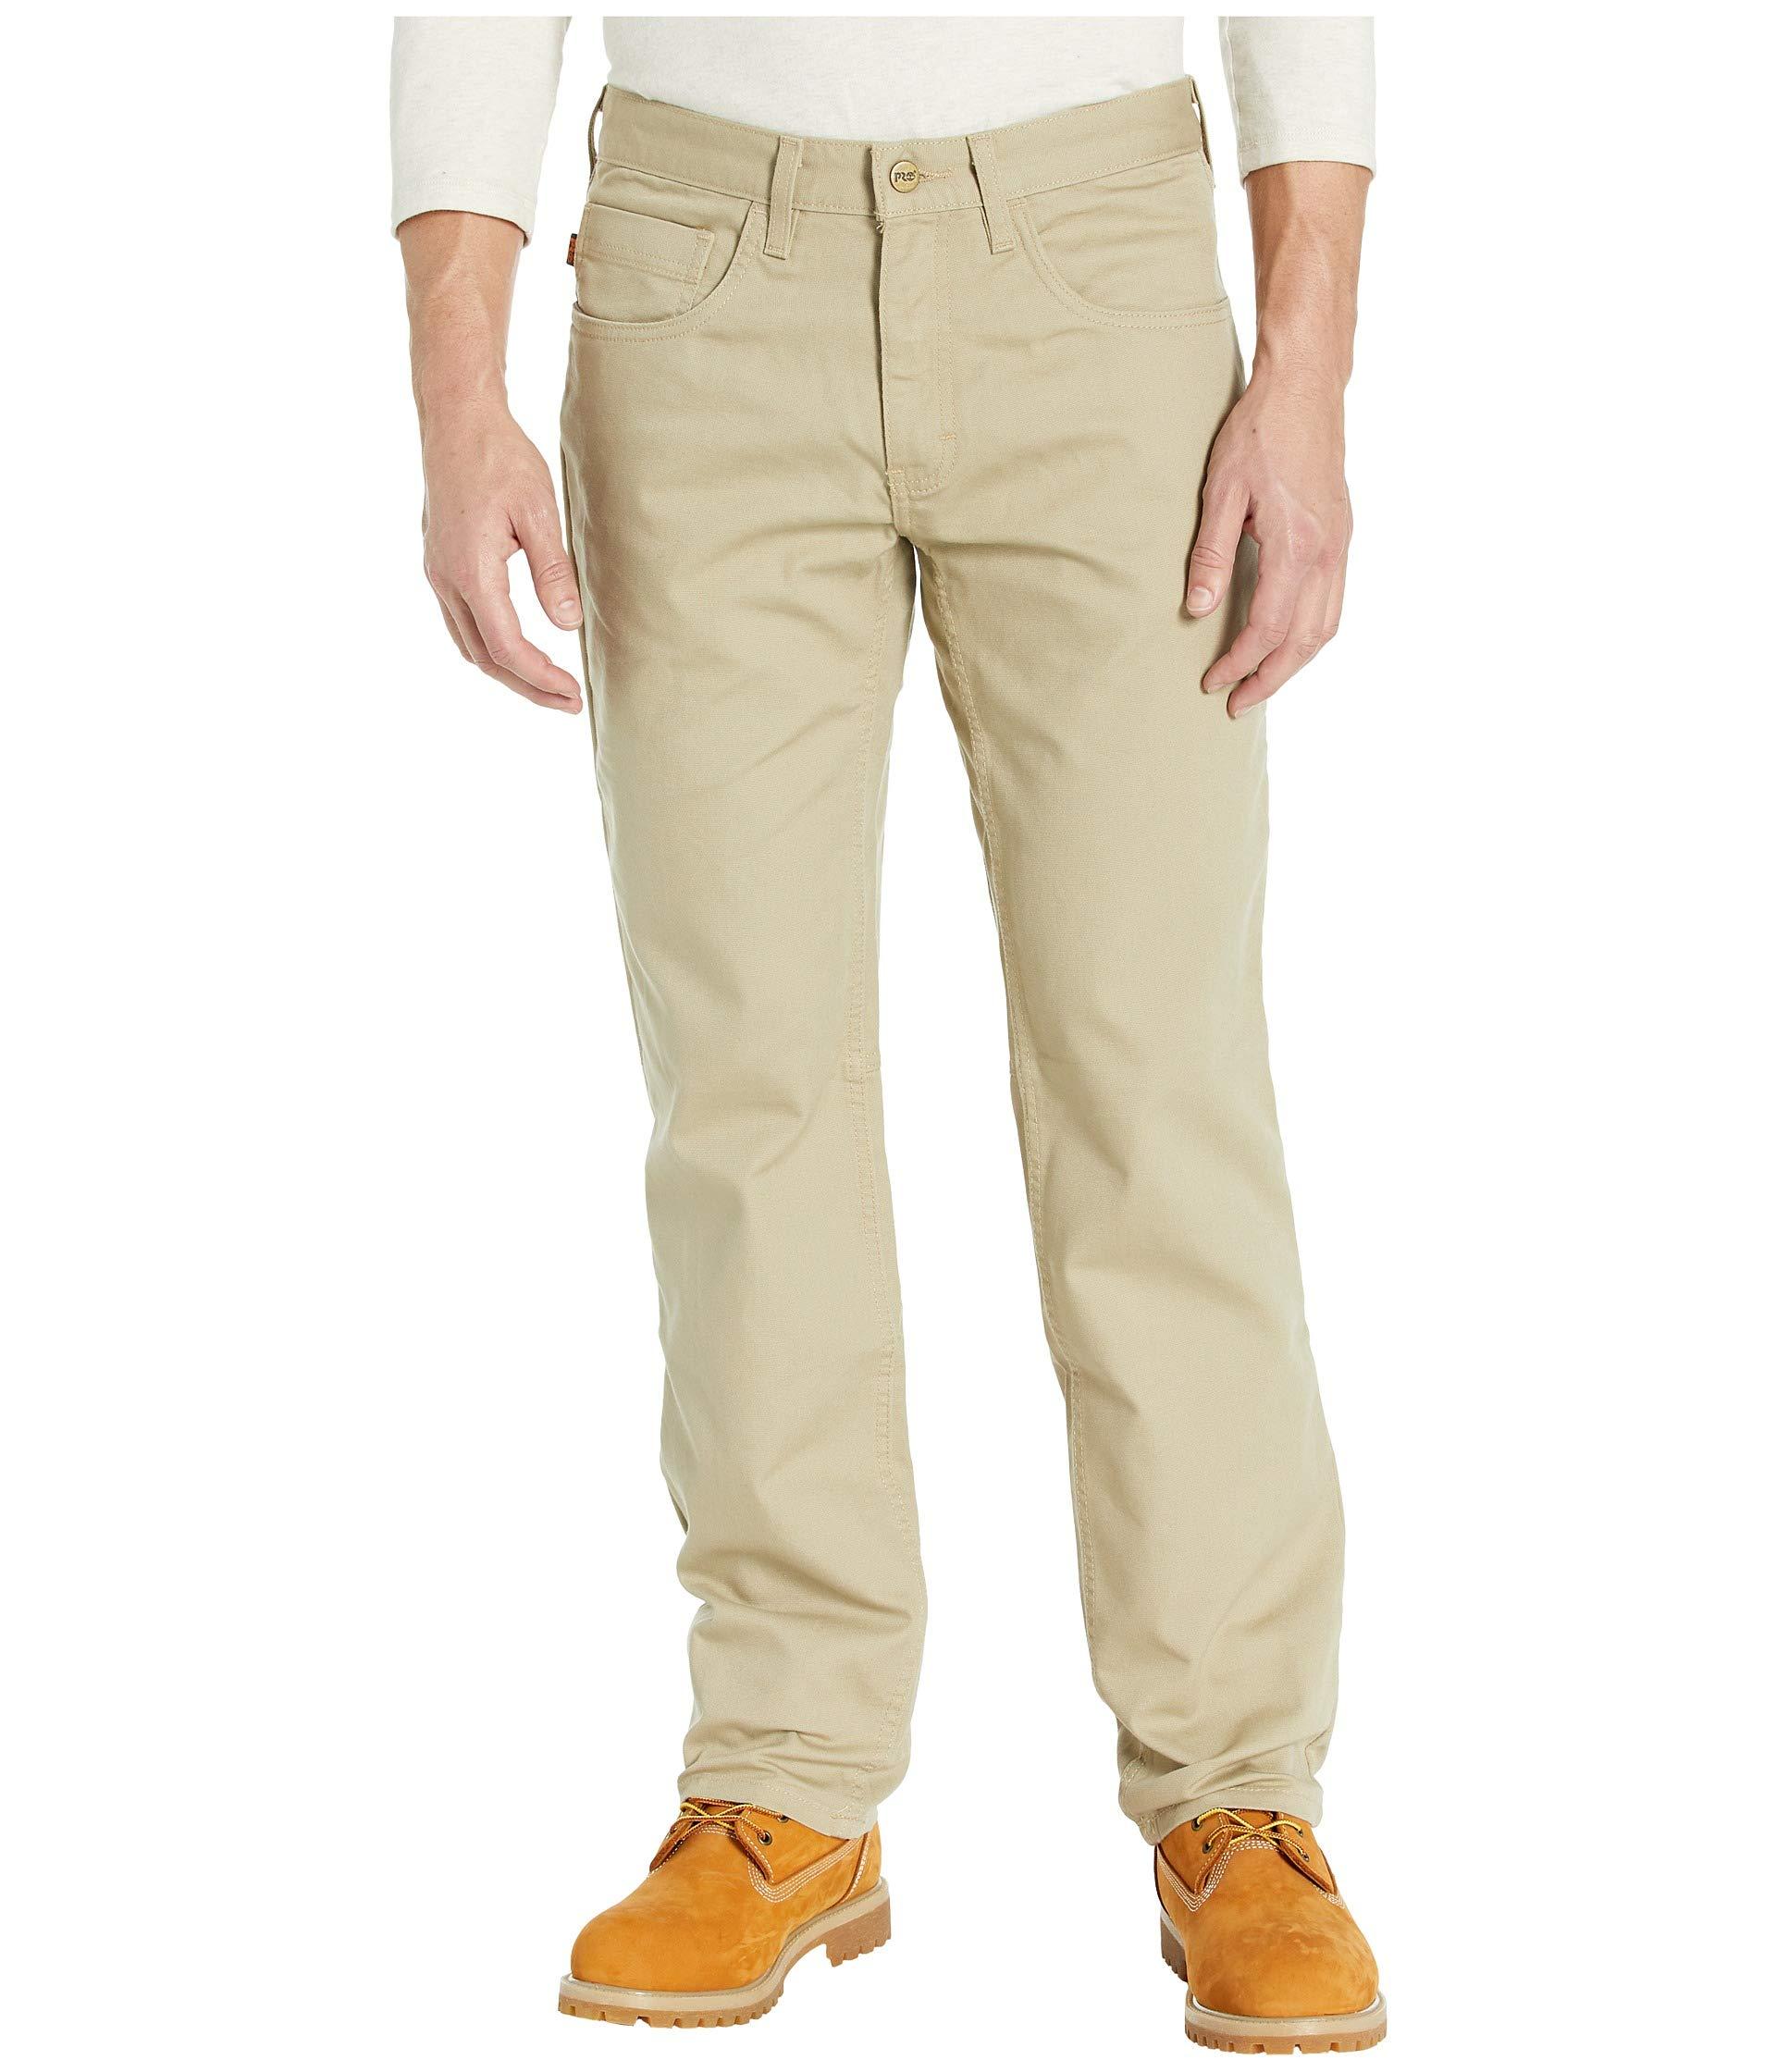 Timberland 8 Series Flex Canvas Work Pants in Khaki (Natural) for Men ...